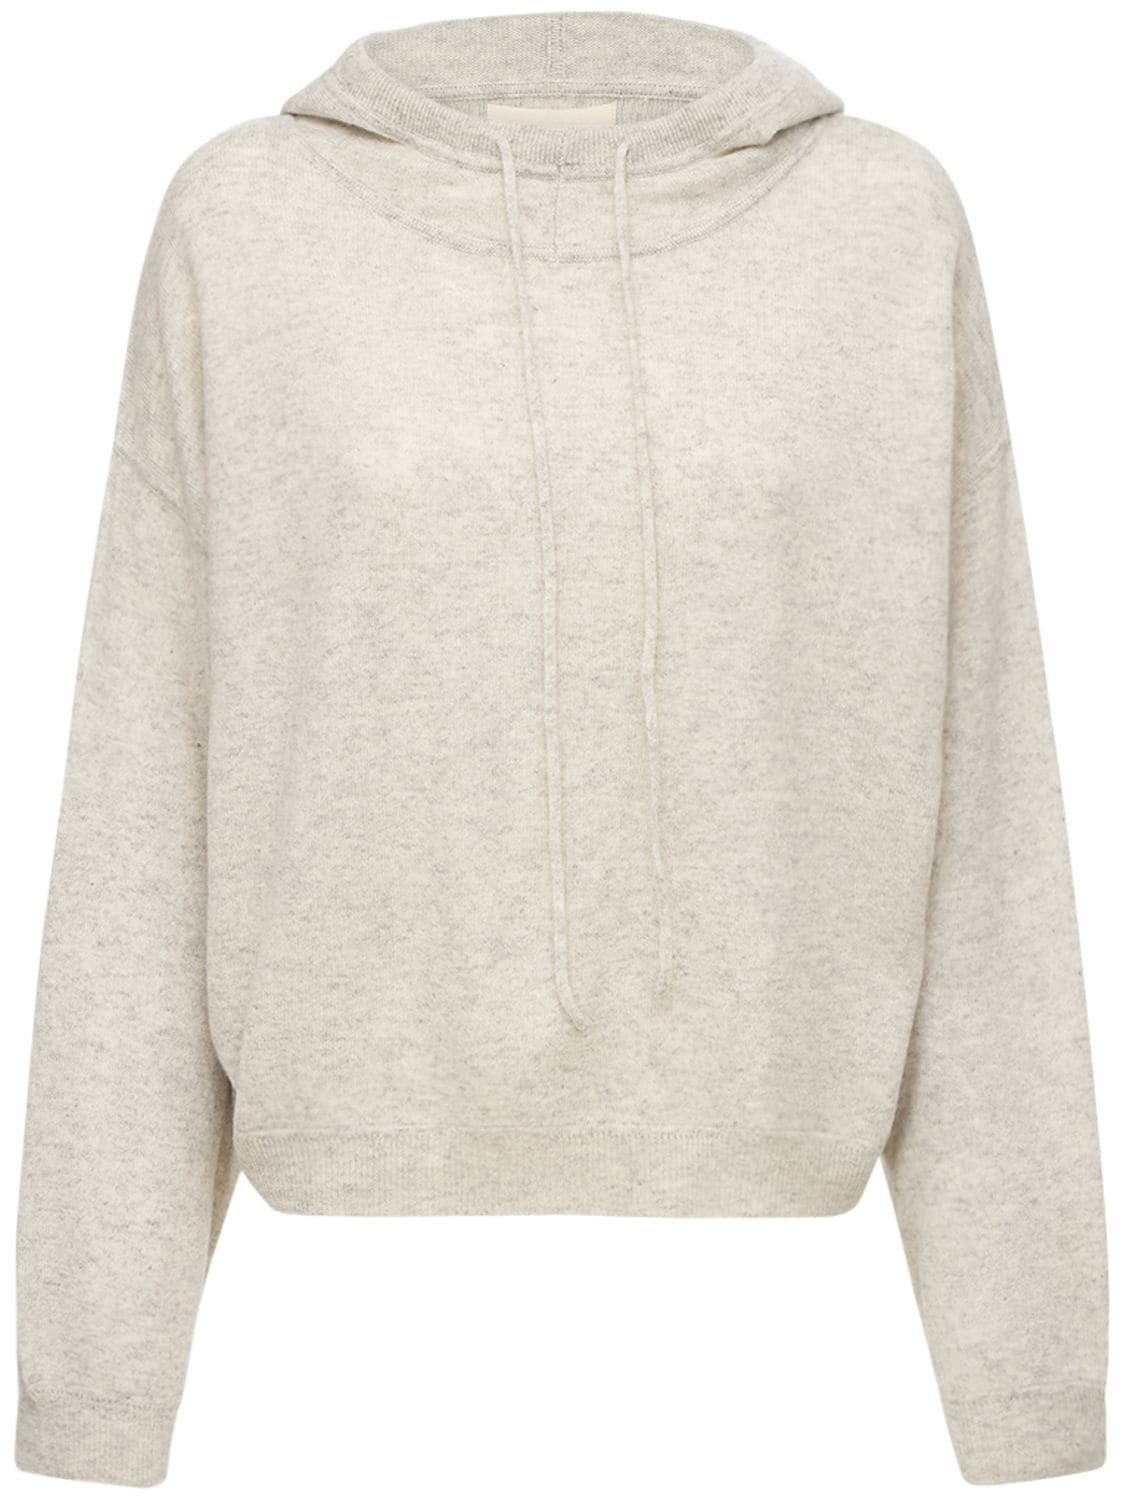 Loulou Studio Linosa Cashmere Knit Sweater In Grey